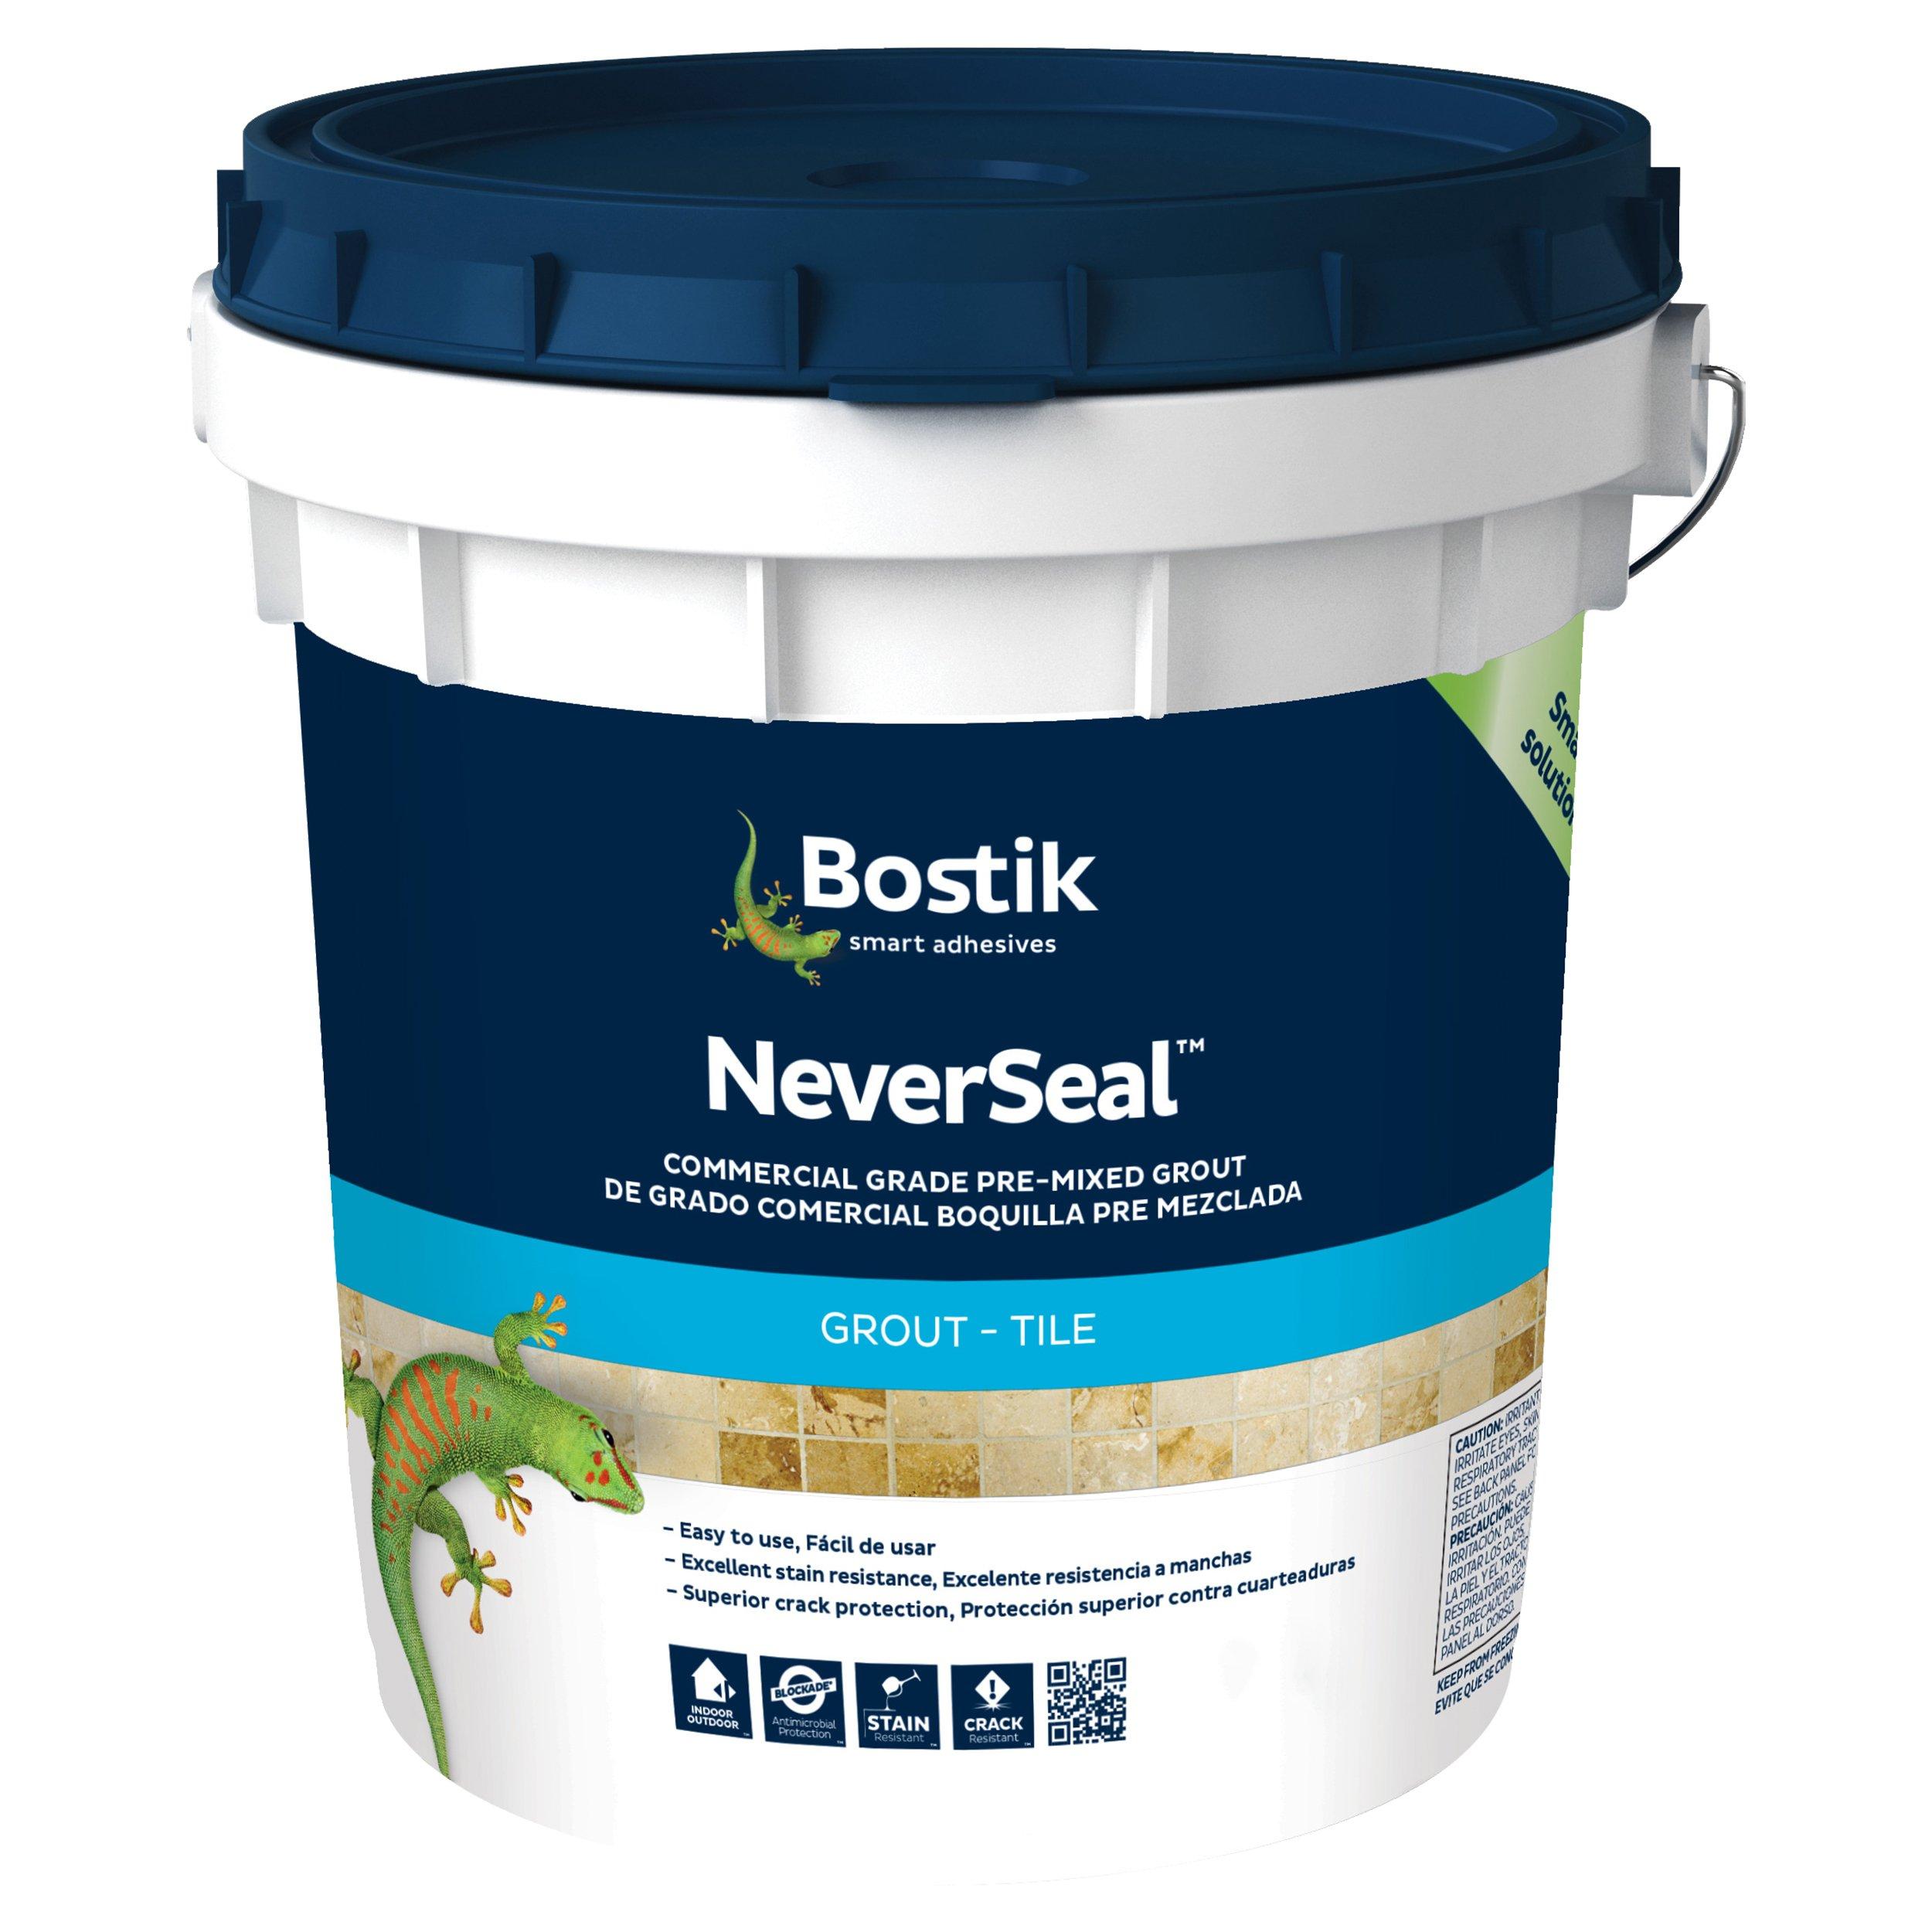 Bostik Neverseal Antique White Pre-Mixed Commercial Grade Grout